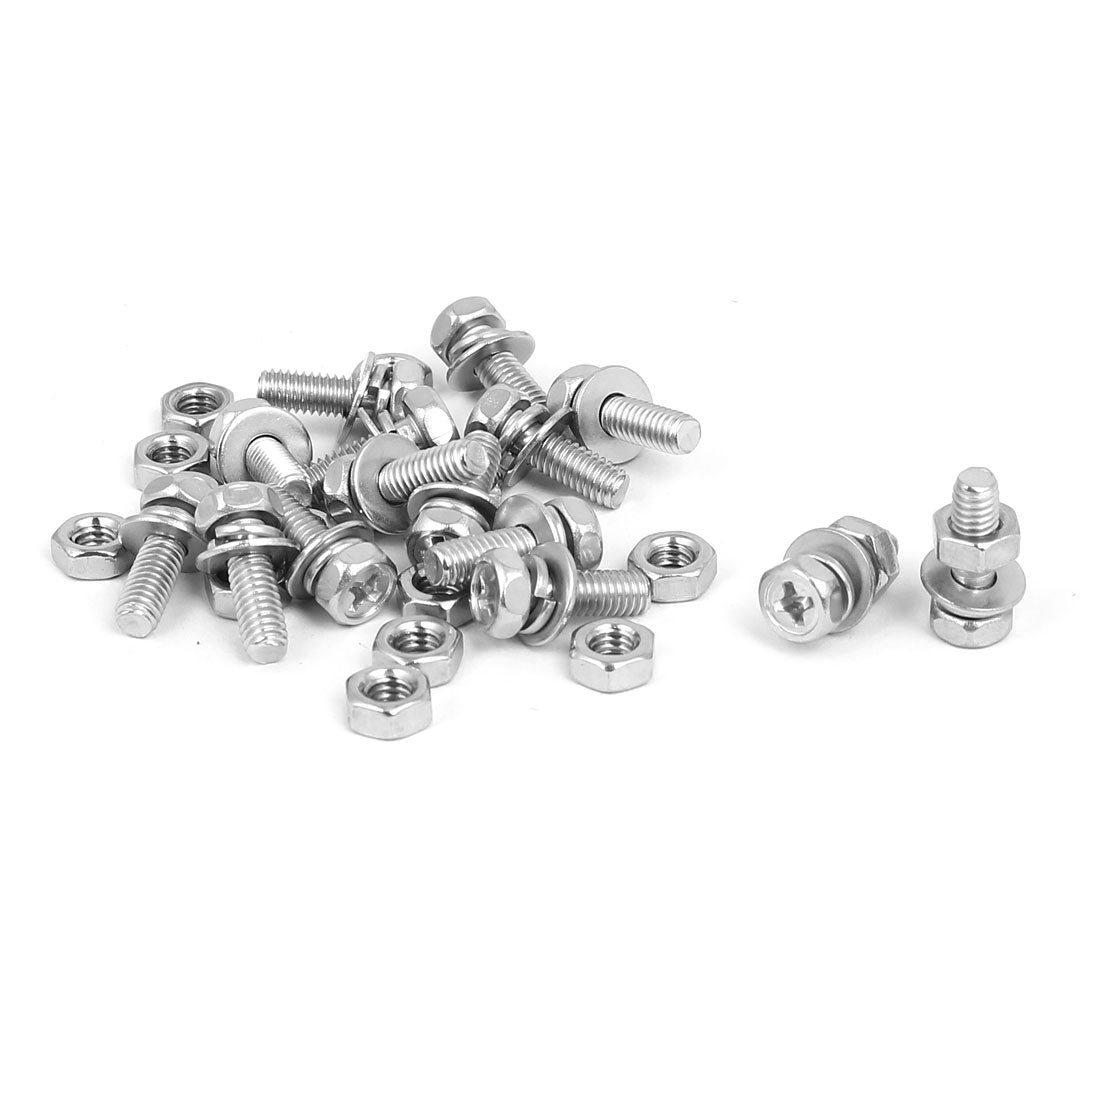 uxcell Uxcell M4 x 12mm 304 Stainless Steel Phillips Hex Head Bolts Nuts w Washers 15 Sets